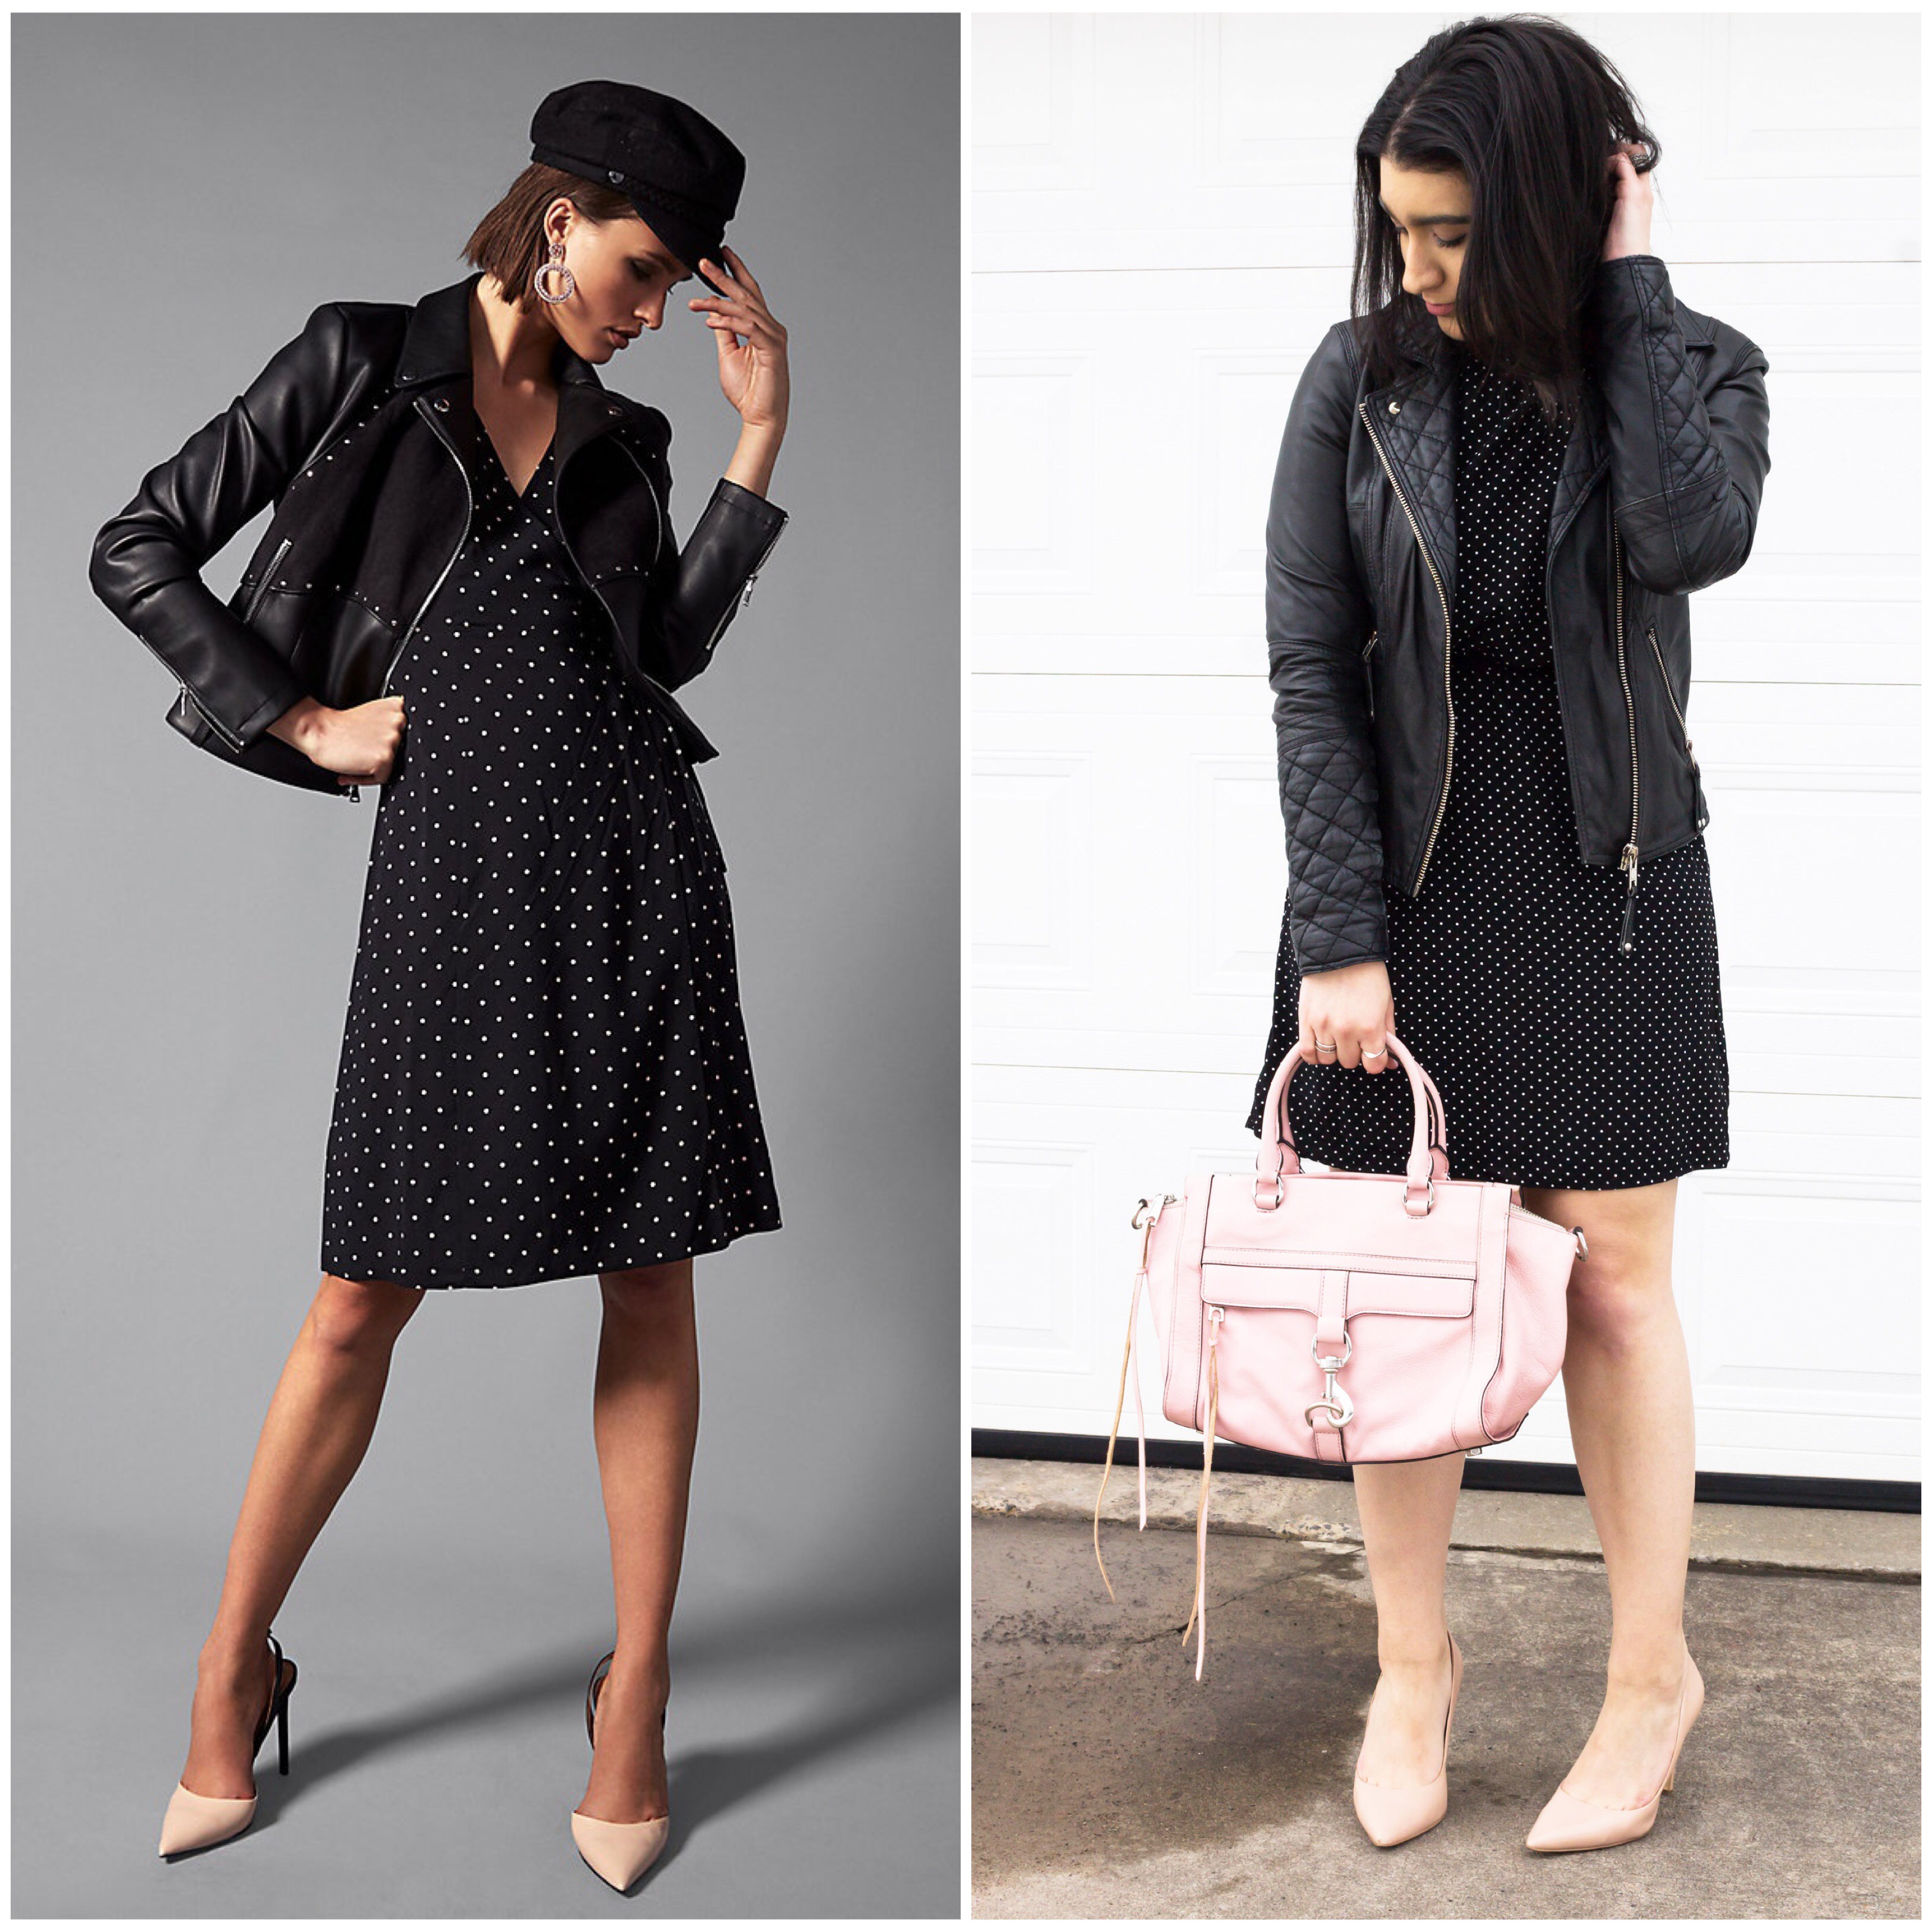 Look for Less: Leather Jacket and Polka Dot Dress